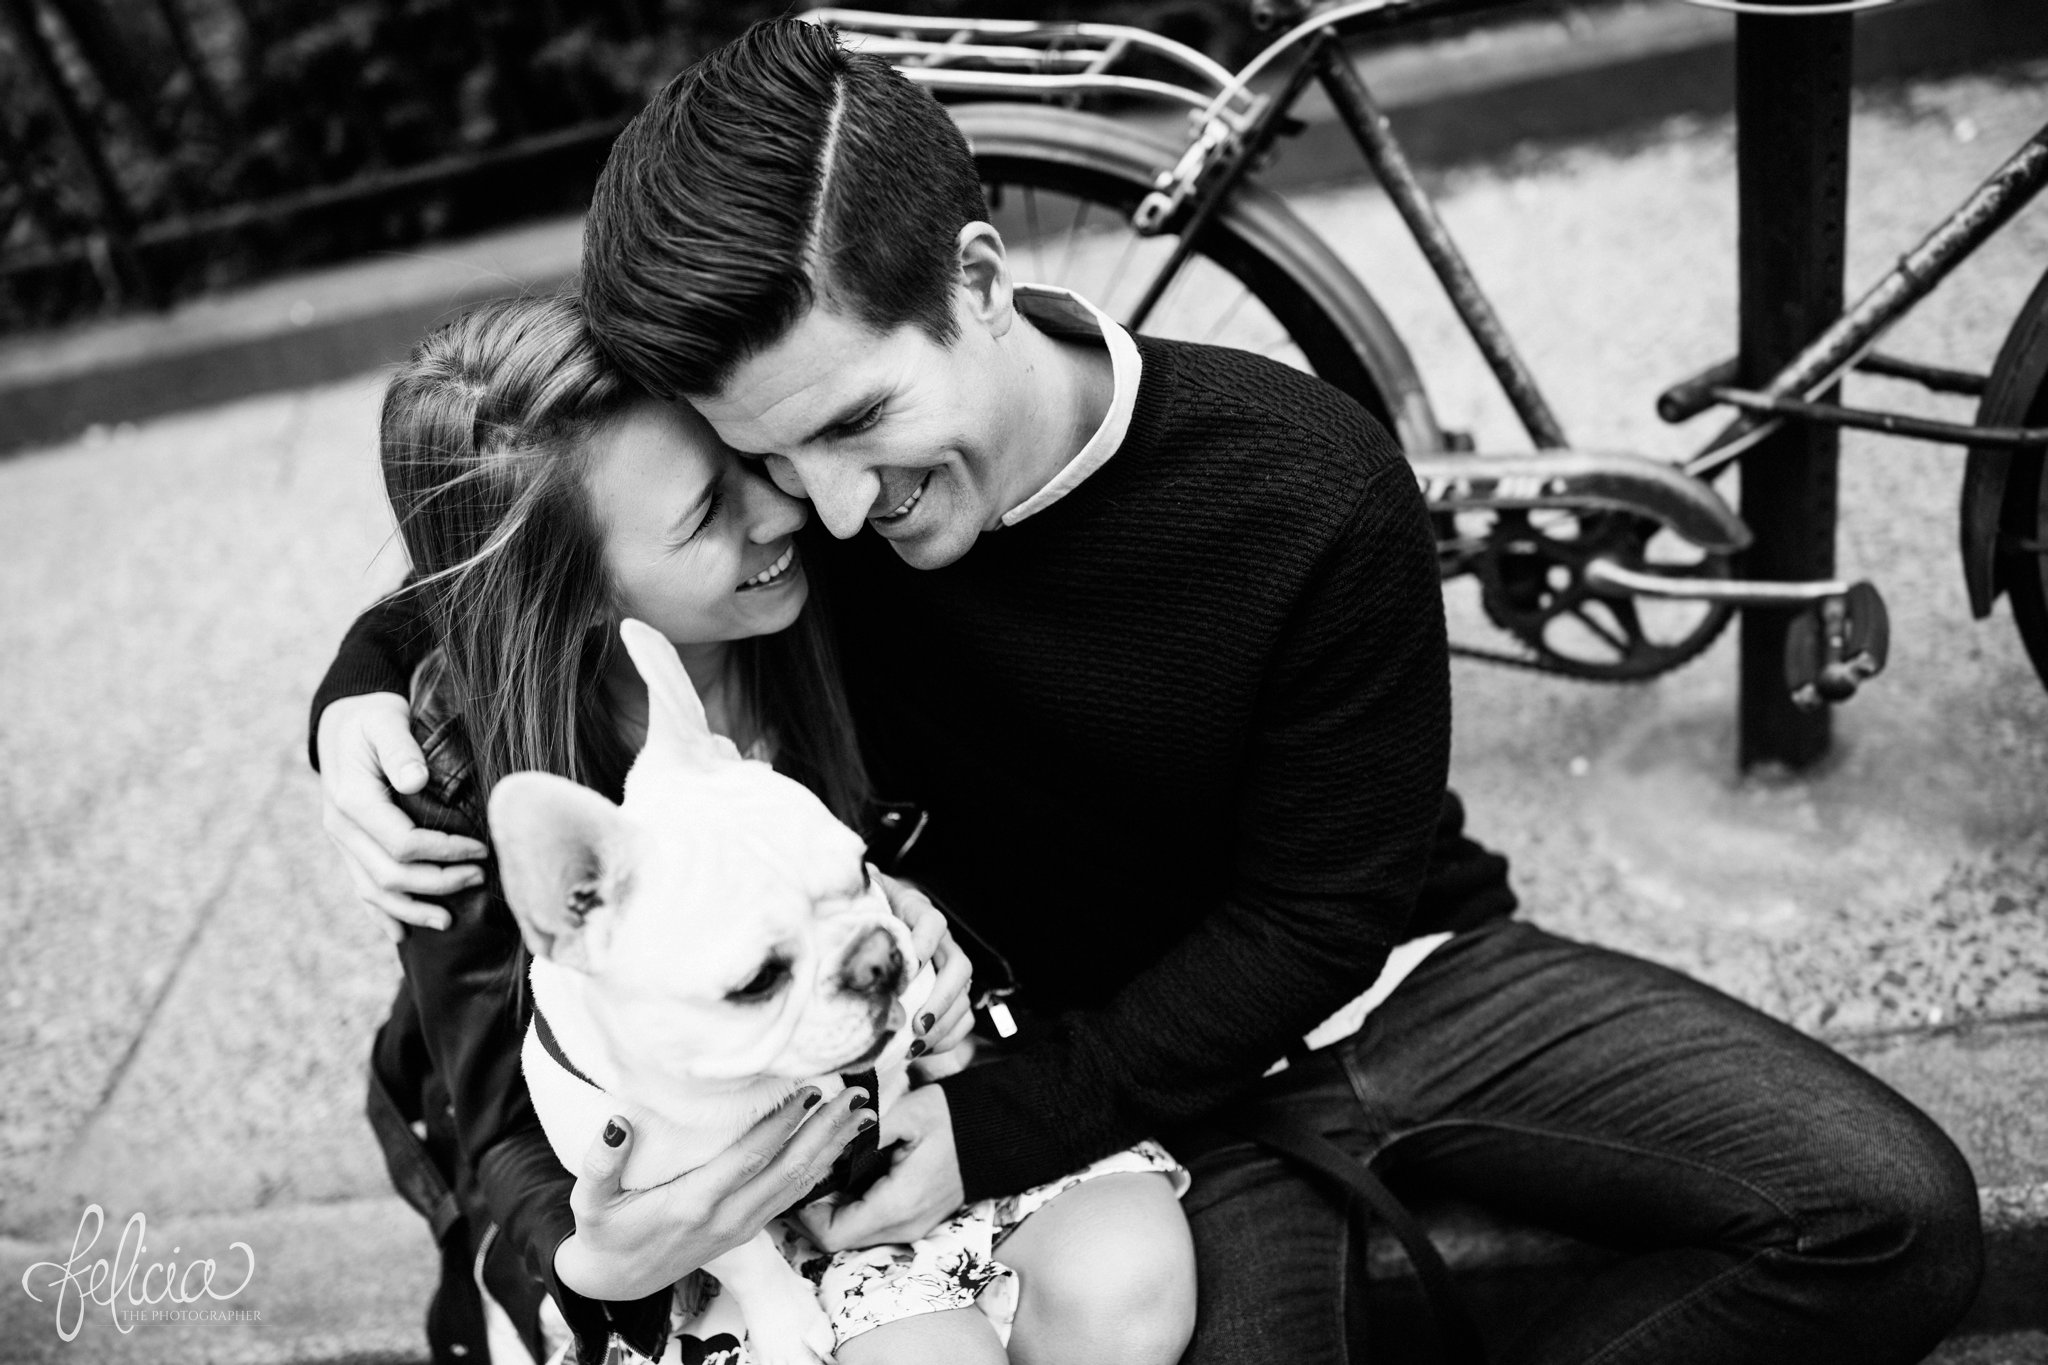 laughing bride and groom | candid | wedding | New York City | West Village | New York City photography | wedding photography | images by feliciathephotographer.com | French Bulldog | engagement photos | engagement pictures in park | engagement pictures with dog | black and white | romantic engagement photos 